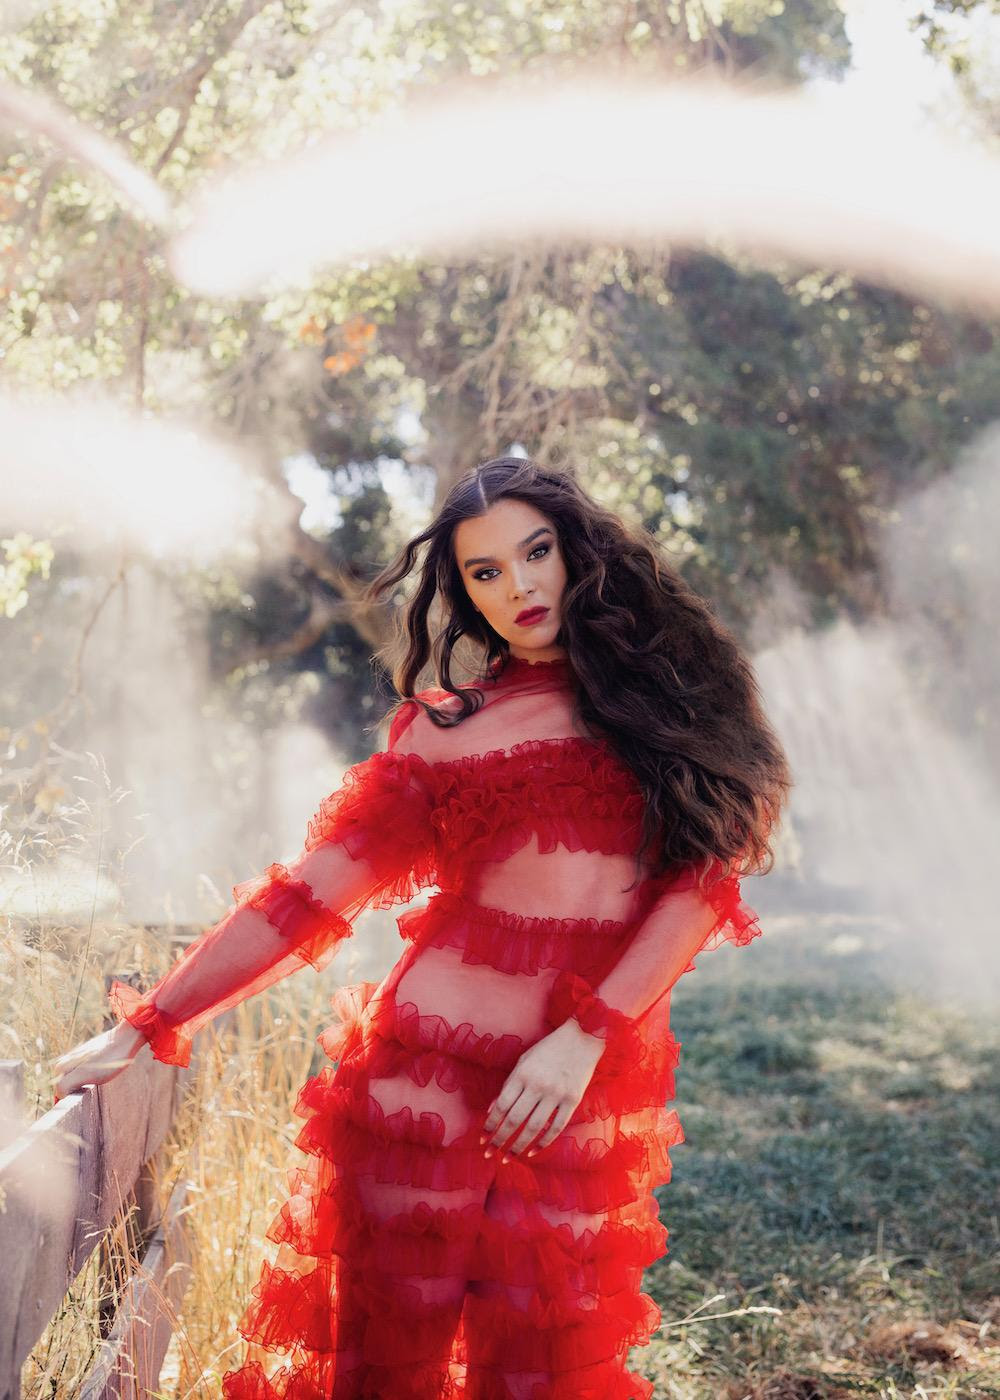 Hailee Steinfeld ponders the ‘afterlife’ with new song